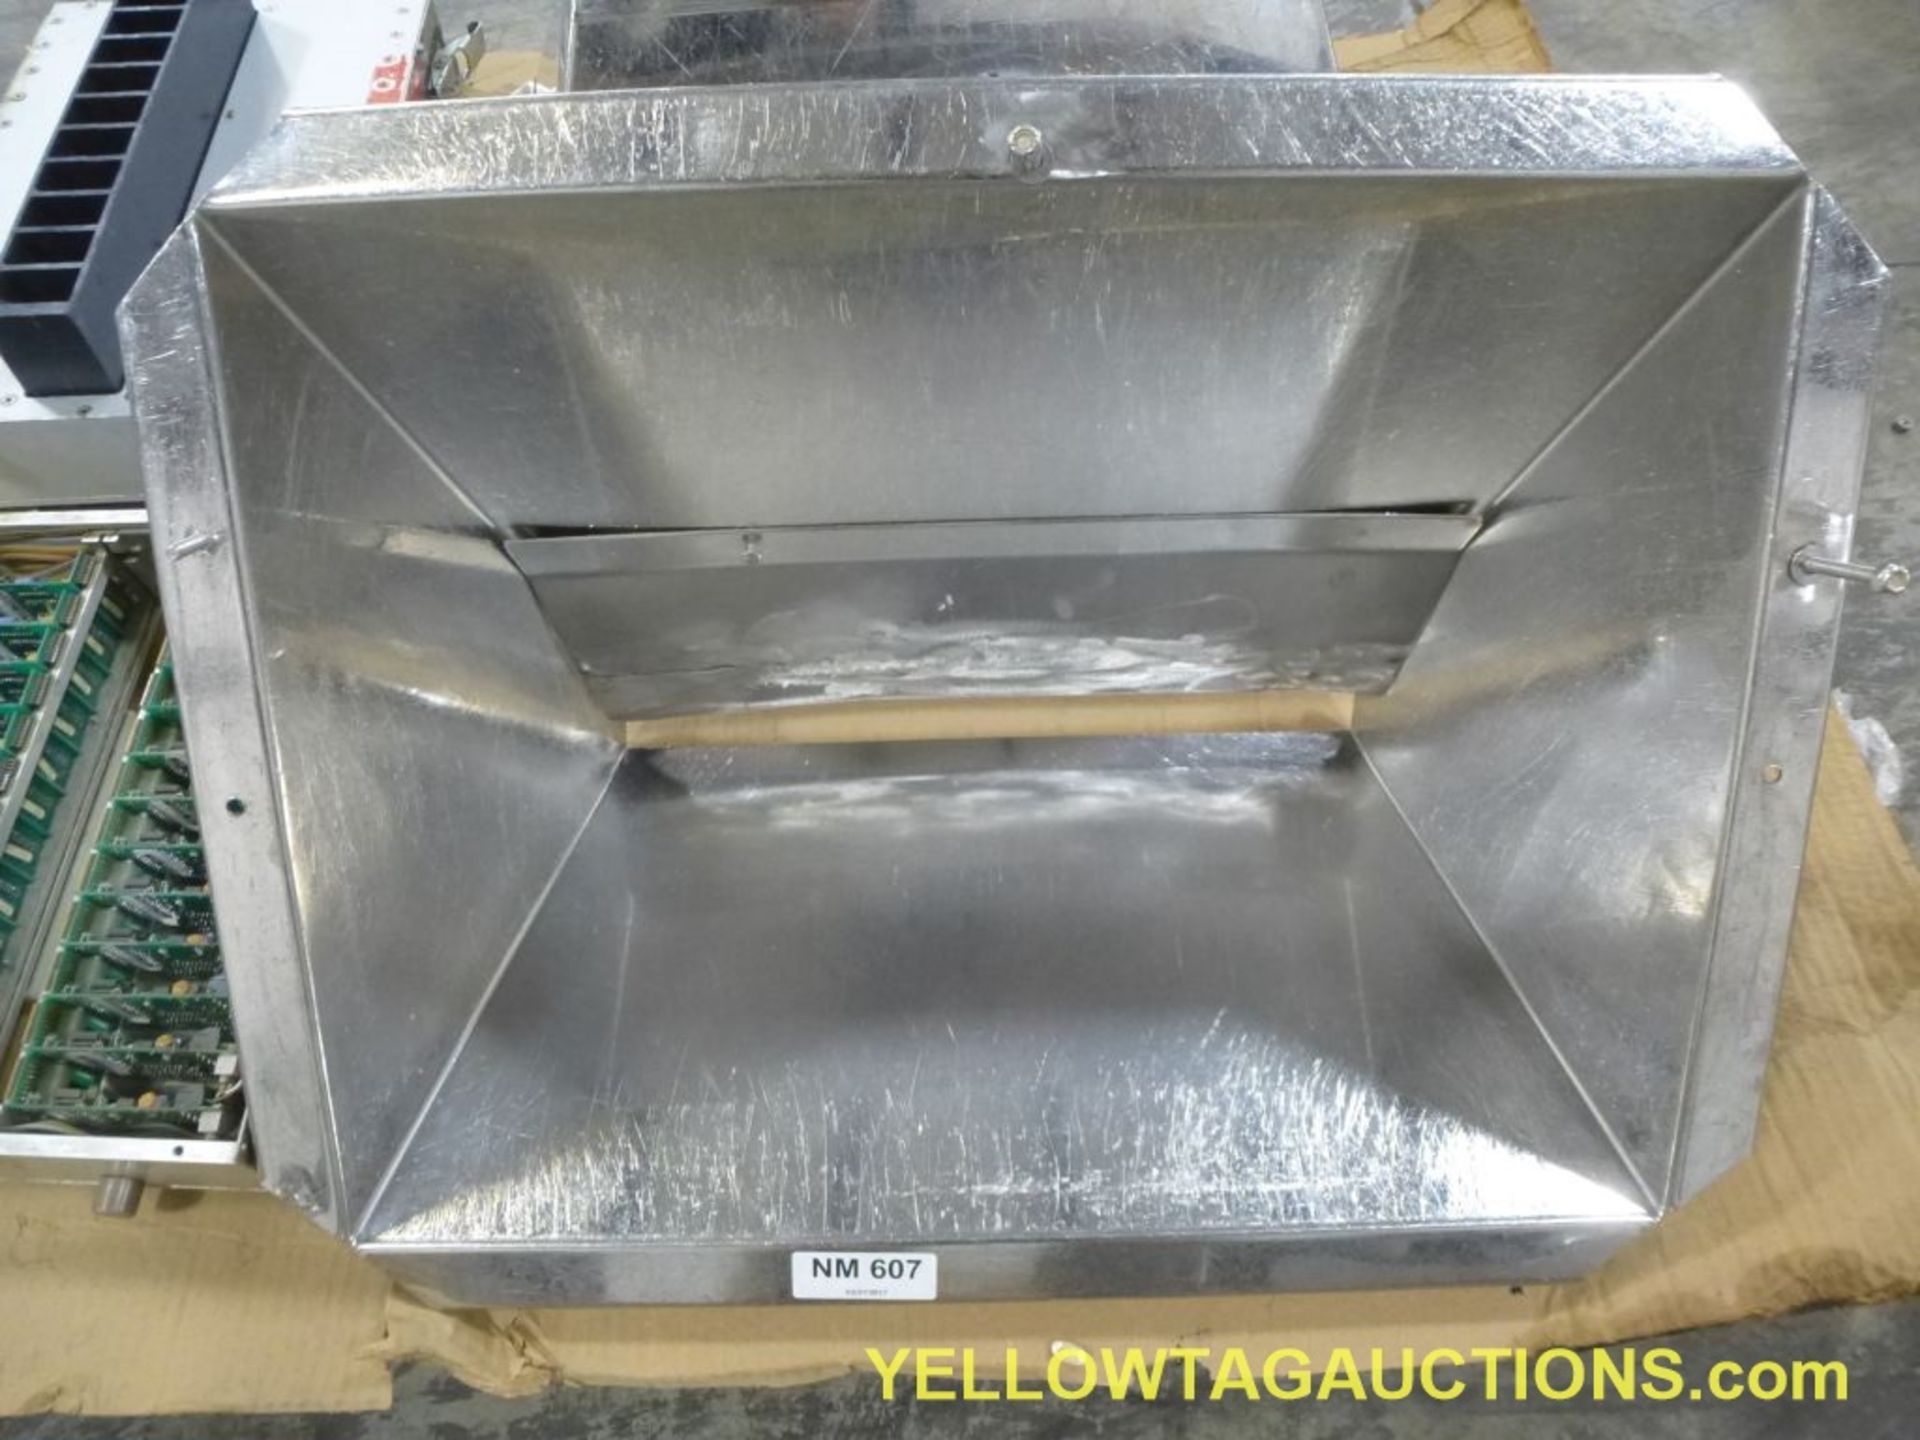 Lot of (2) Stainless Steel Hoppers for Vibratory Feeders|Lot Loading Fee: $5.00 - Image 2 of 7